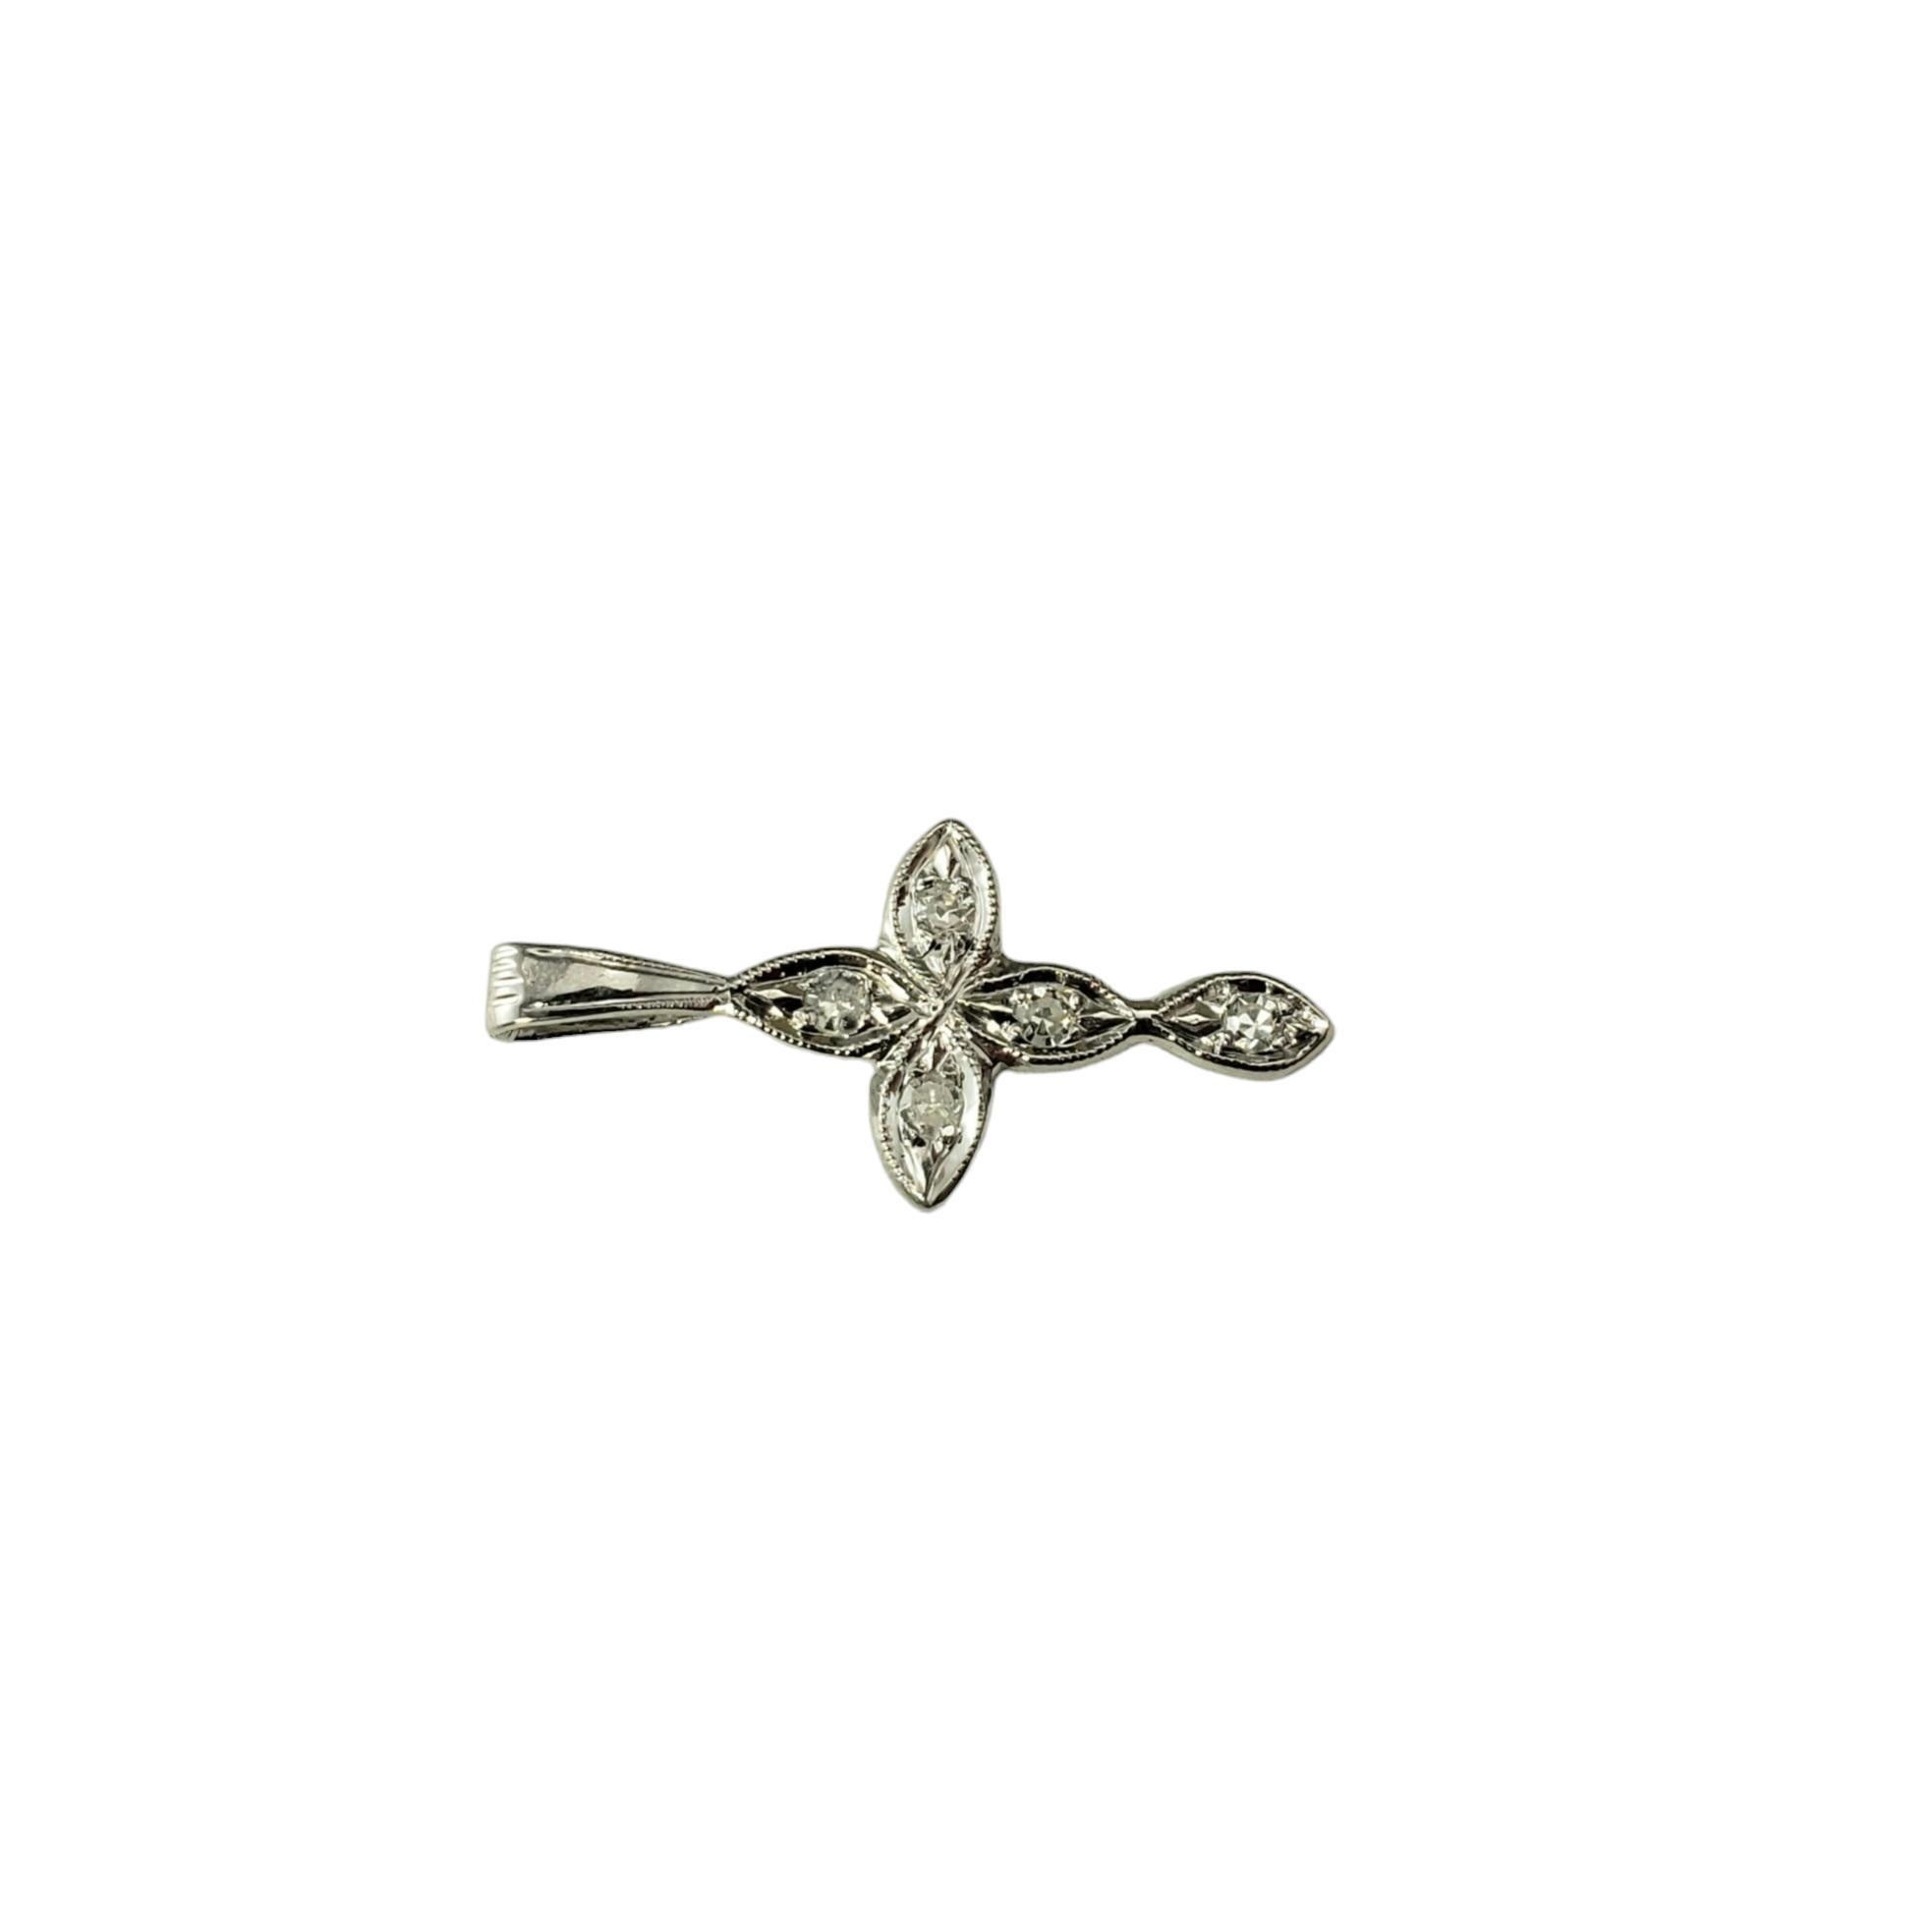 10 Karat White Gold and Diamond Cross Pendant-

This lovely cross pendant features five round single cut diamond set in classic 10K white gold.

Approximate total diamond weight: .05 ct.

Diamond color: I

Diamond clarity: SI1-I1

Size: 20 mm x 9